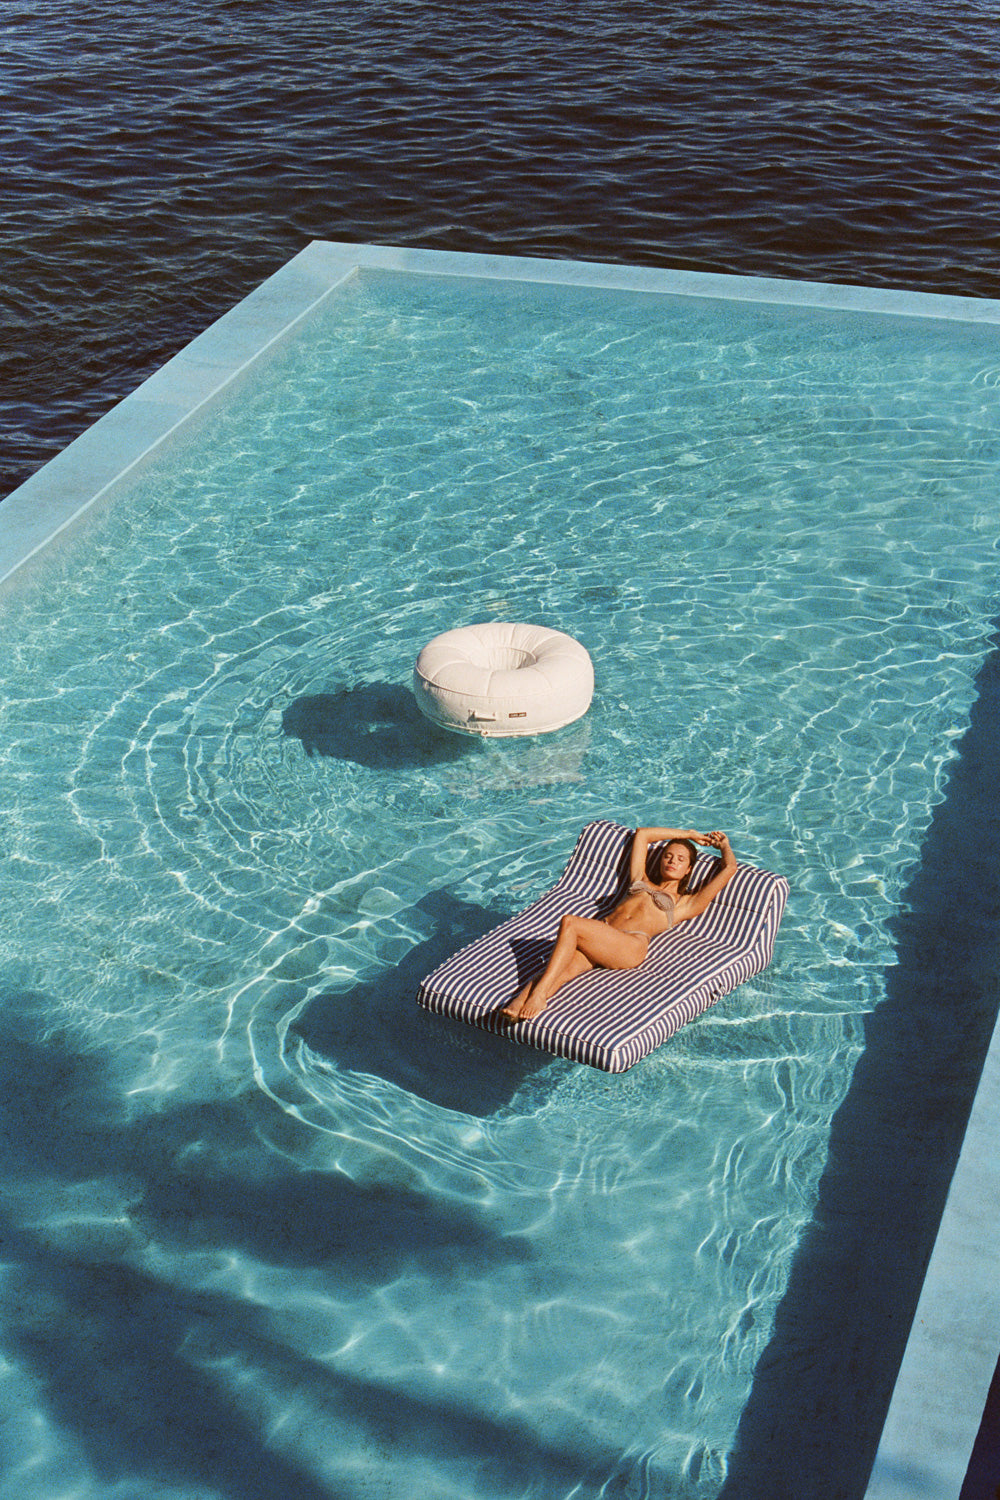 A women floating on a double blue and white striped luxury pool float in a pool with the ocean and white ring luxury pool float in the background.